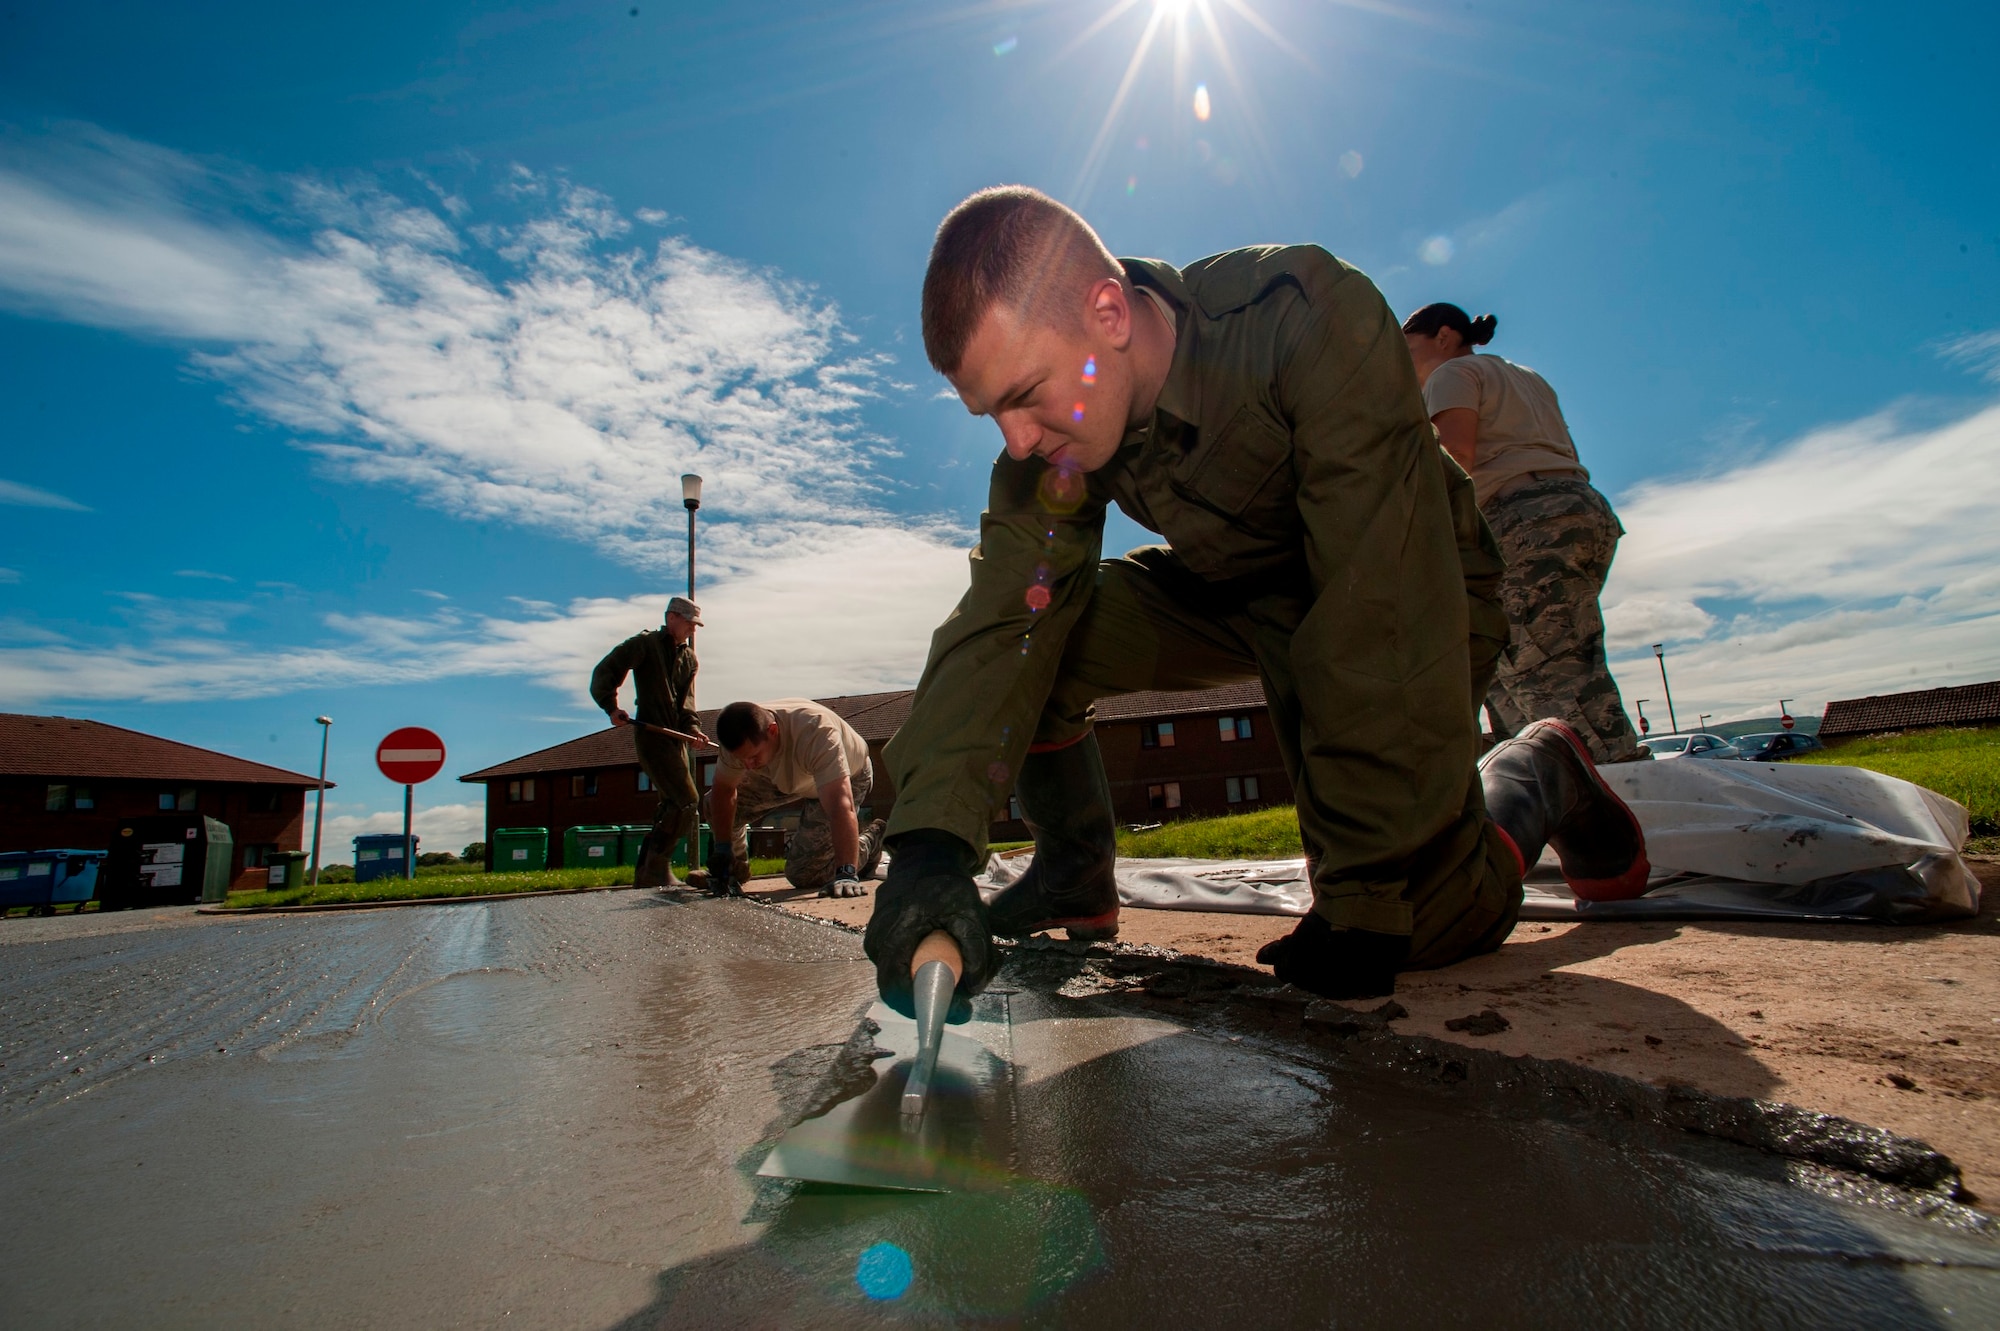 U.S. Air Force  Senior Airman Alexander Root-Davis, 140th Civil Engineer Squadron, Colorado Air National Guard, uses a finishing trowel to smooth out the top of freshly laid cement that will help improve the base junior dorms area once completed, during a deployed for training trip, known as Exercise Flying Rose at Kinloss Barrack in Forres, Moray, Scotland, United Kingdom, Jun. 16, 2014. Over 40 members of the 140th CES are in Scotland for their annual training and are accomplishing five construction projects that will improve several areas around Kinloss Barracks, during Exercise Flying Rose hosted by the British Army before returning back to Colorado later this month. (U.S. Air National Guard photo by Tech. Sgt. Wolfram M. Stumpf)